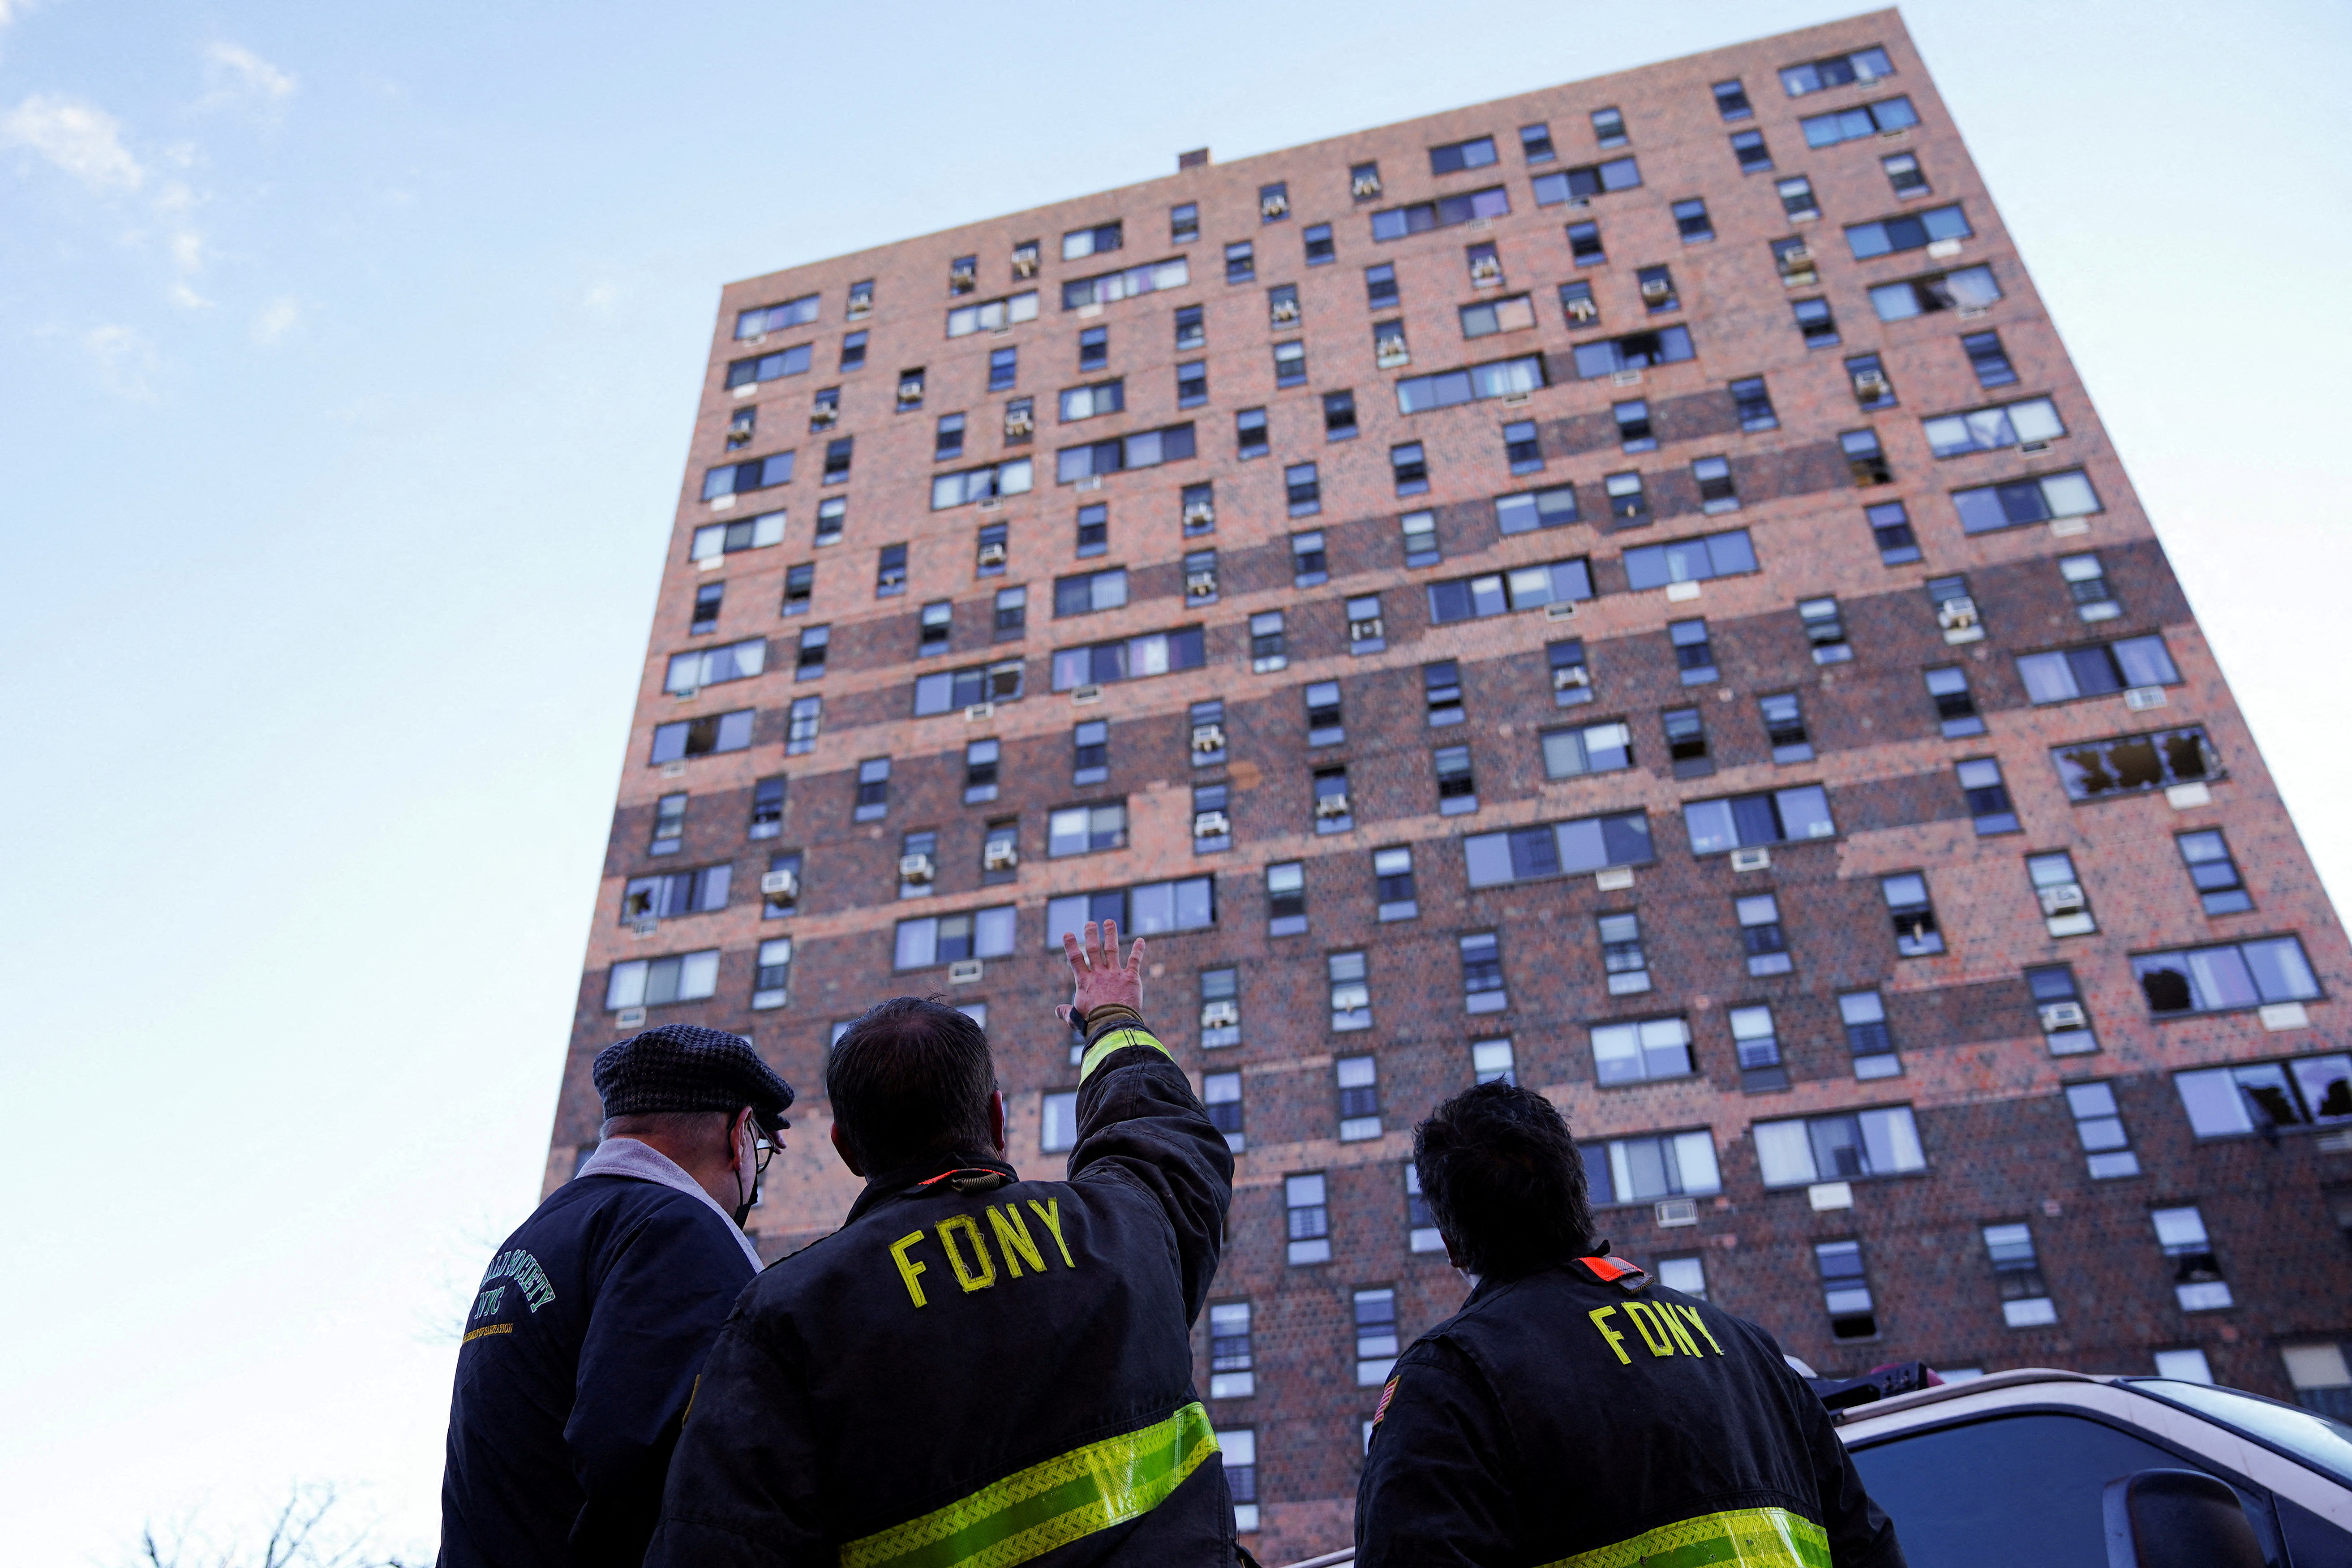 Firemen stand at the scene of a fire at an apartment building in New York City